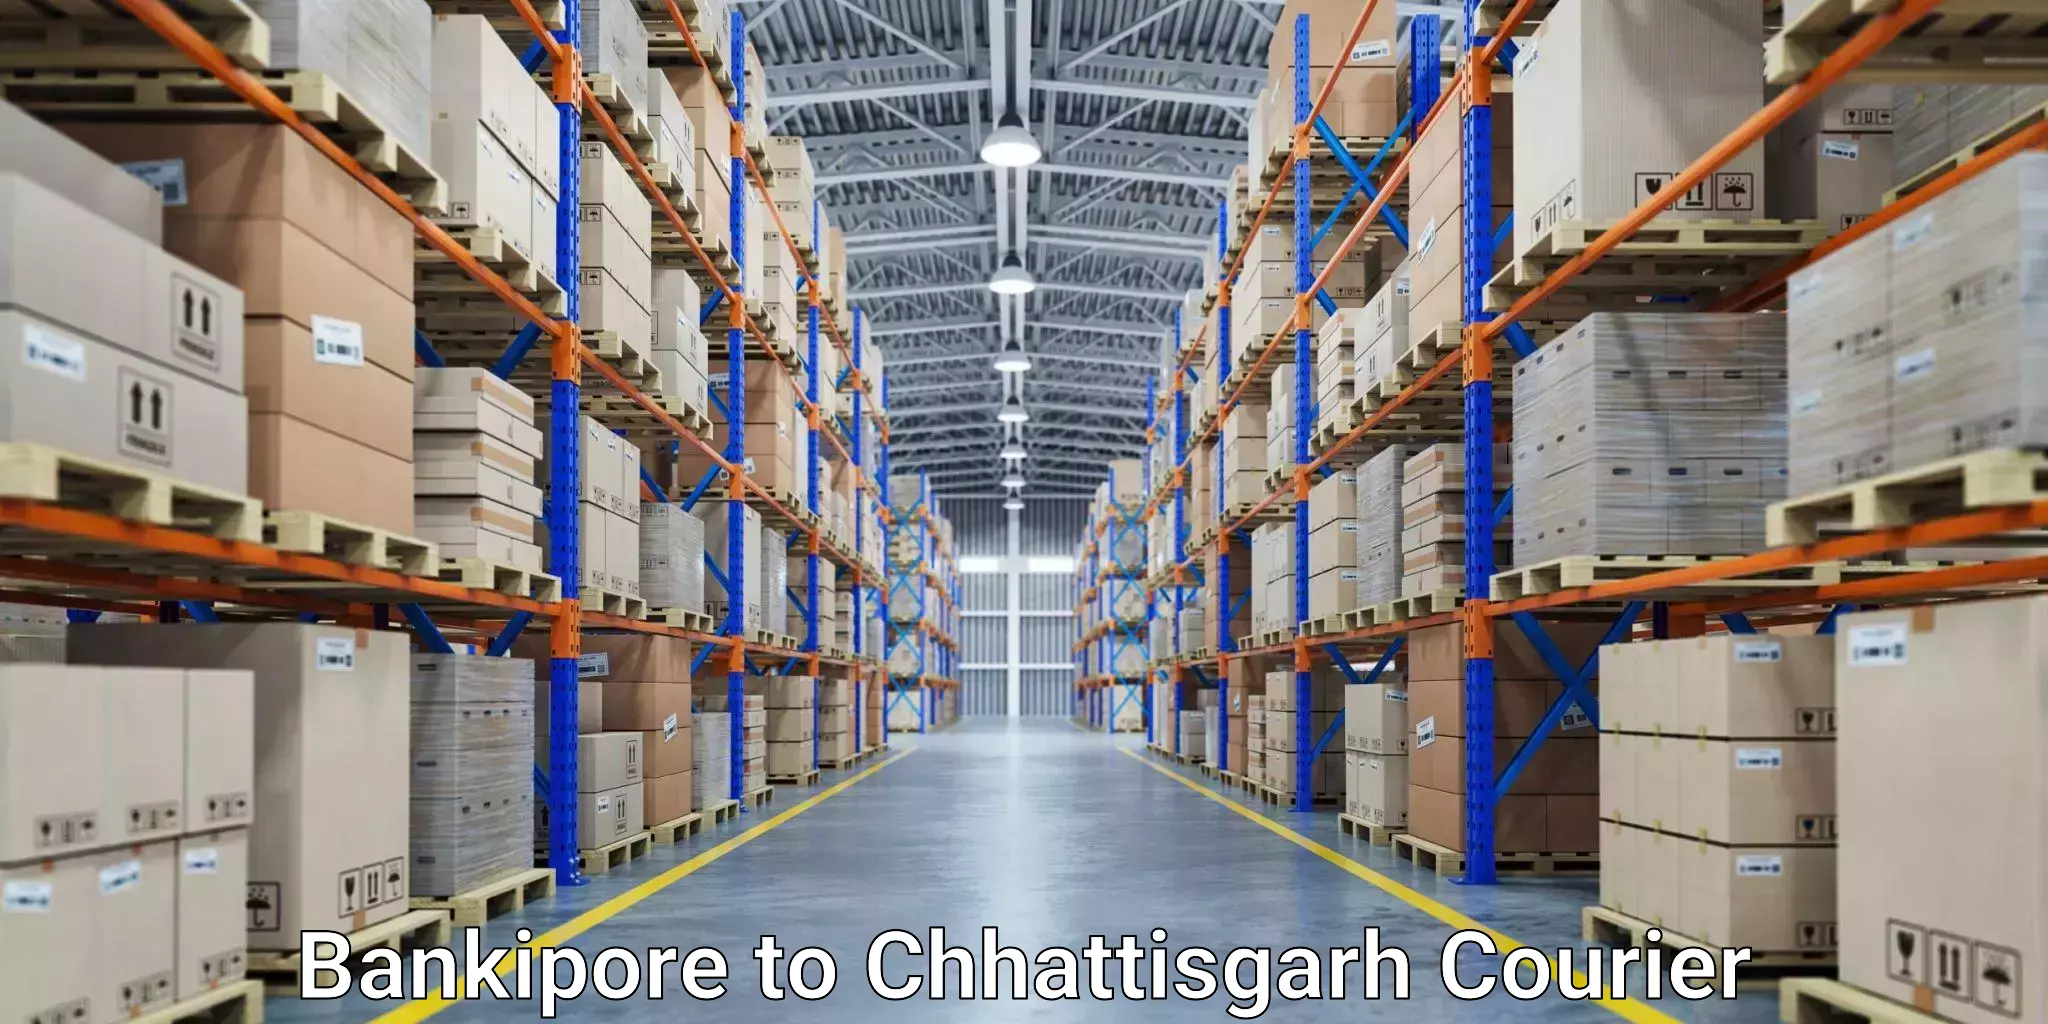 Courier service comparison Bankipore to bagbahra